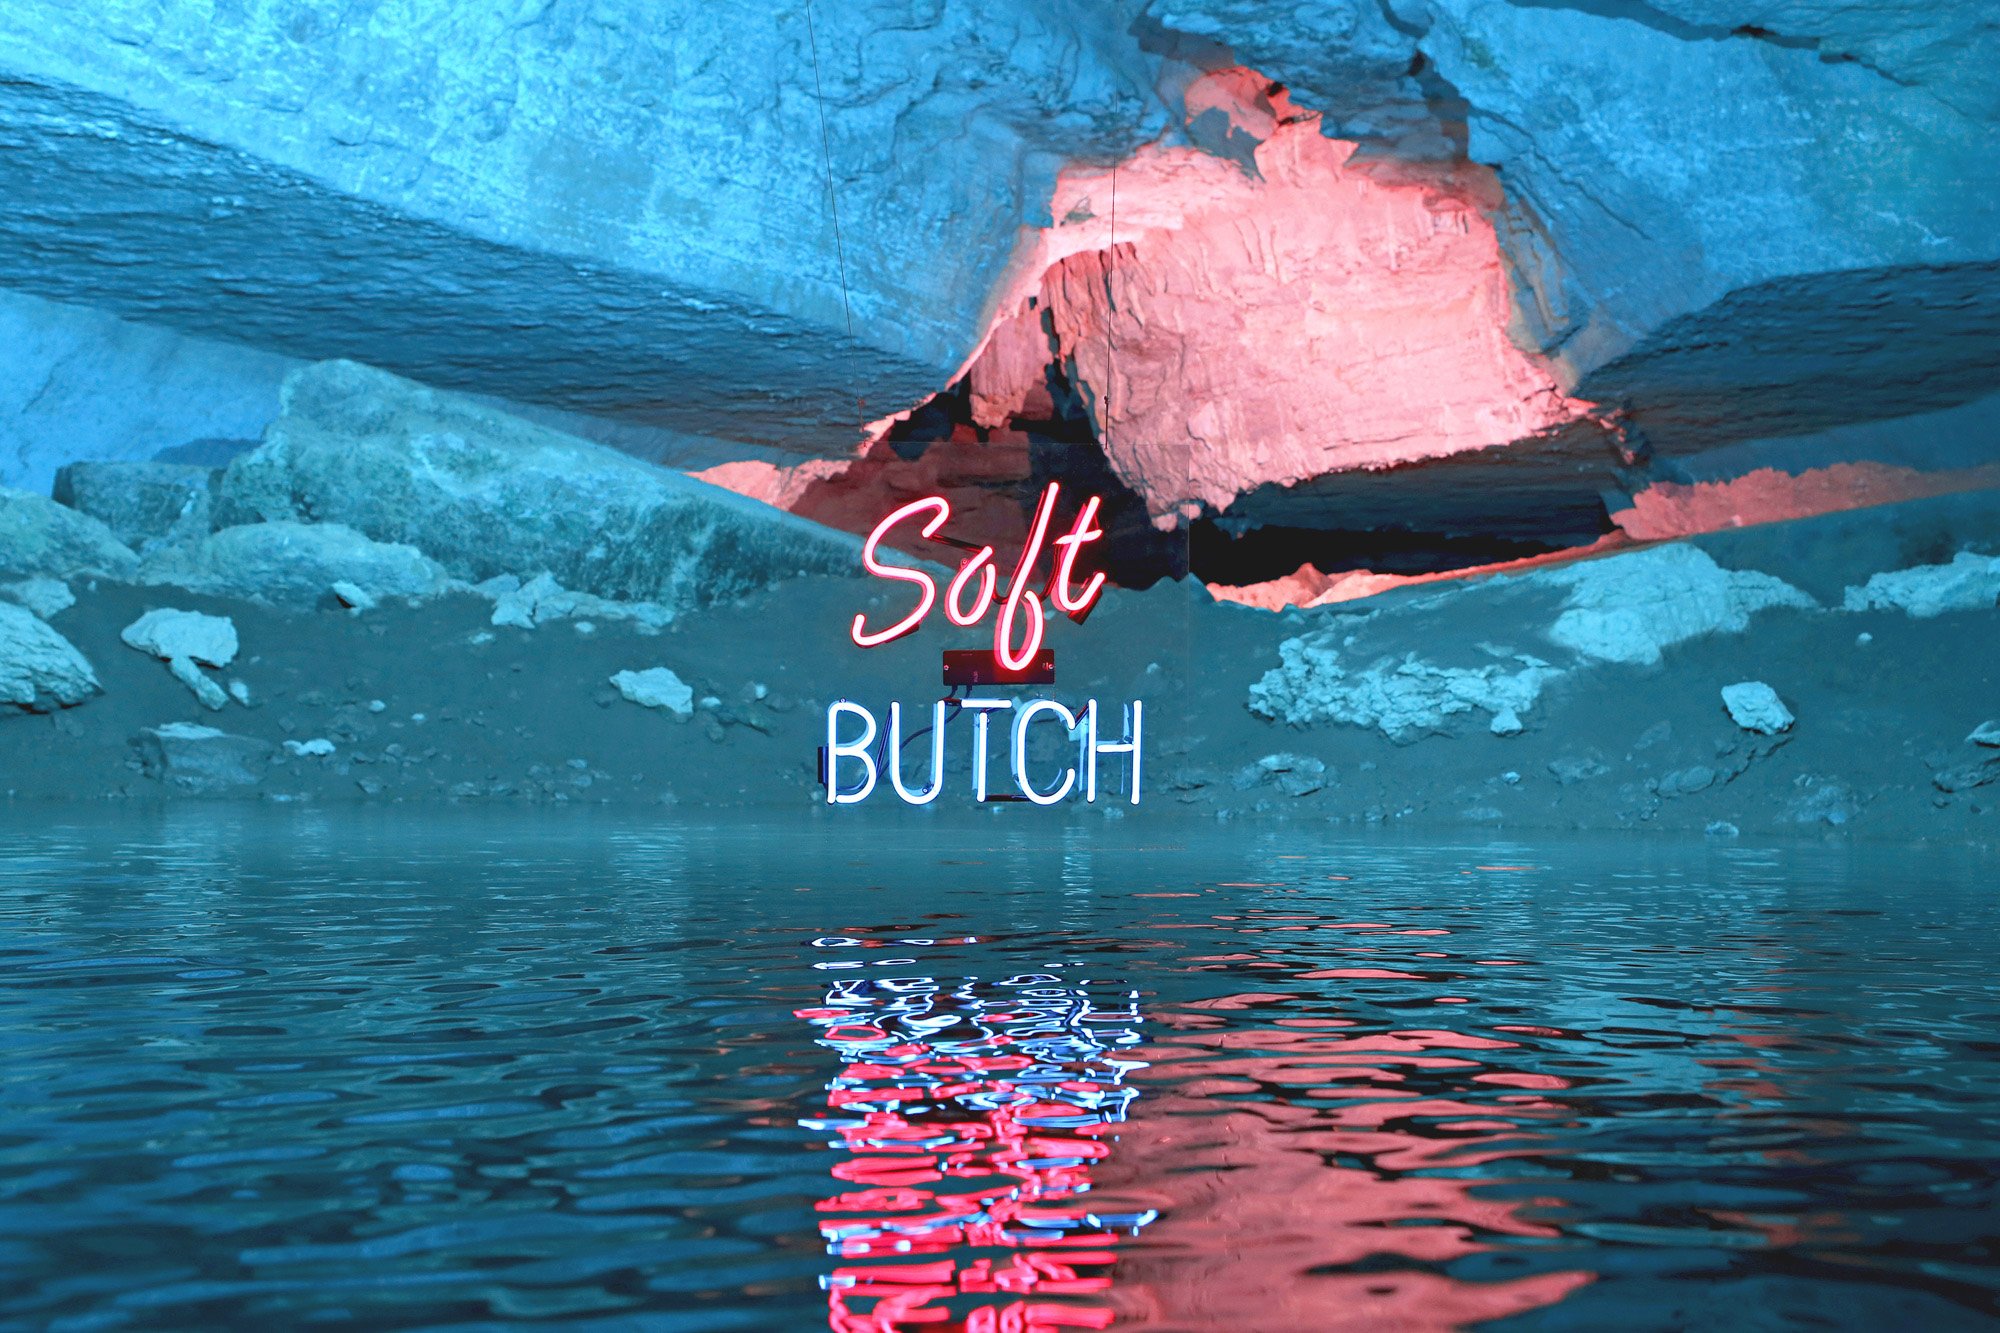  “Soft Butch” (2014) by Benjy Russell 